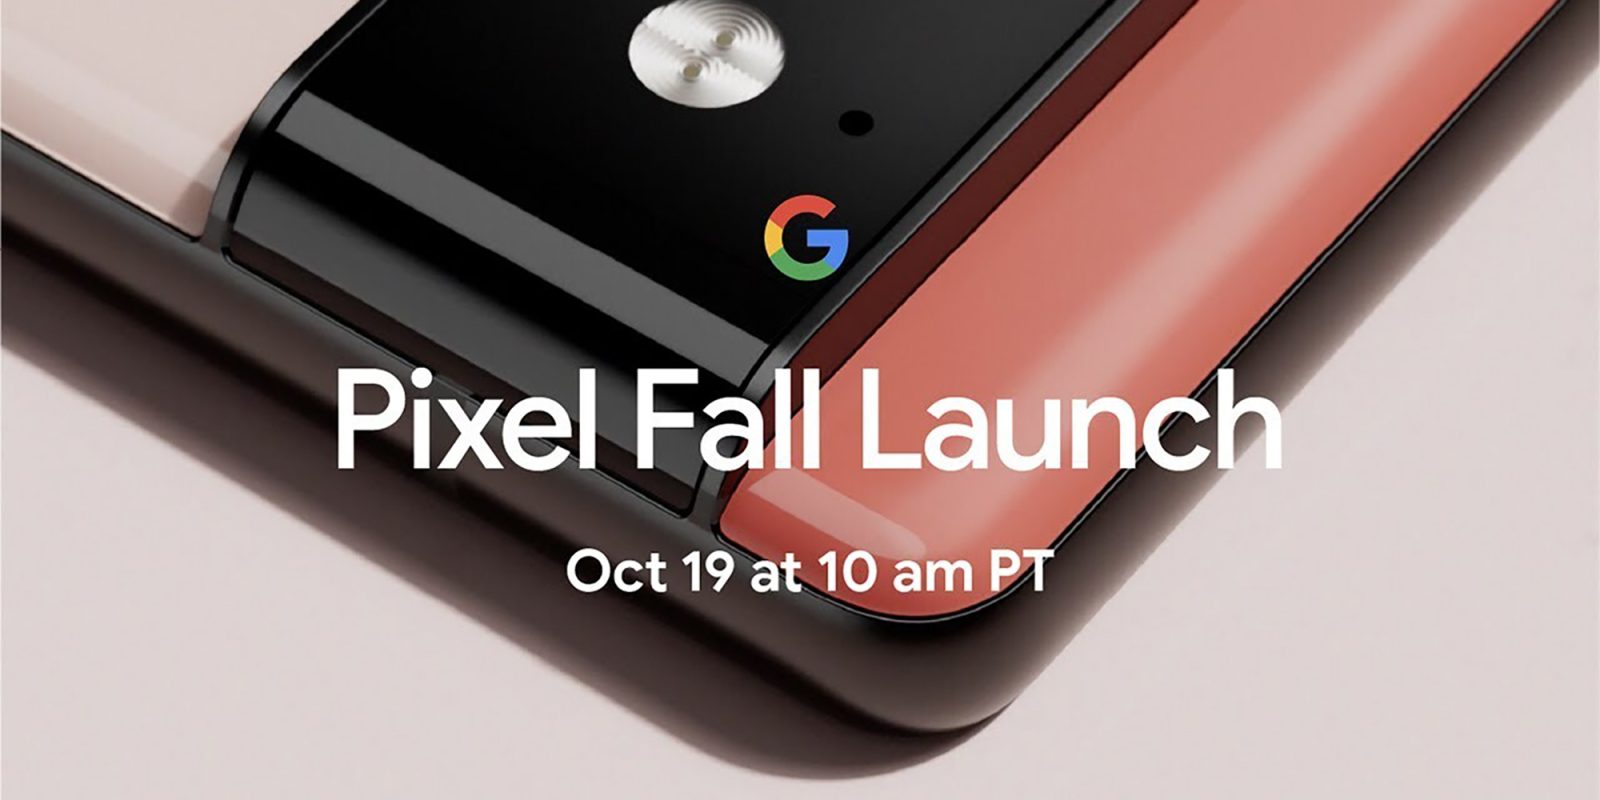 Pixel Fall Launch event